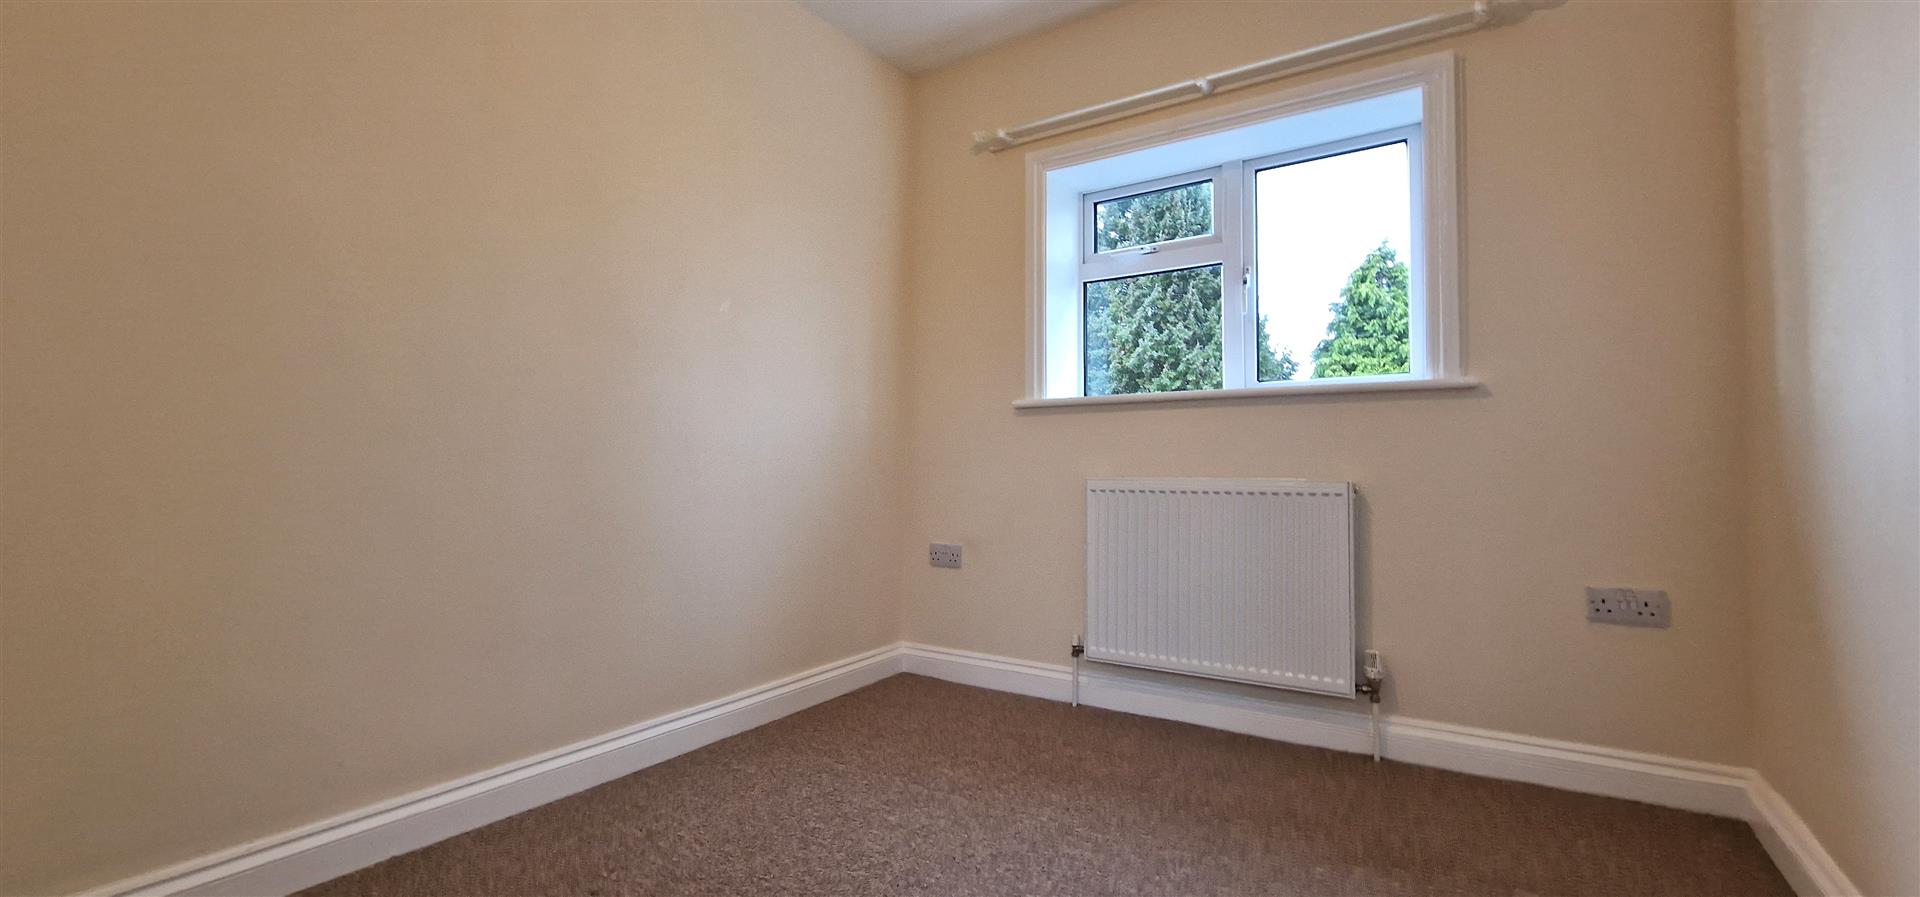 3 bed house to rent, Hereford  - Property Image 7